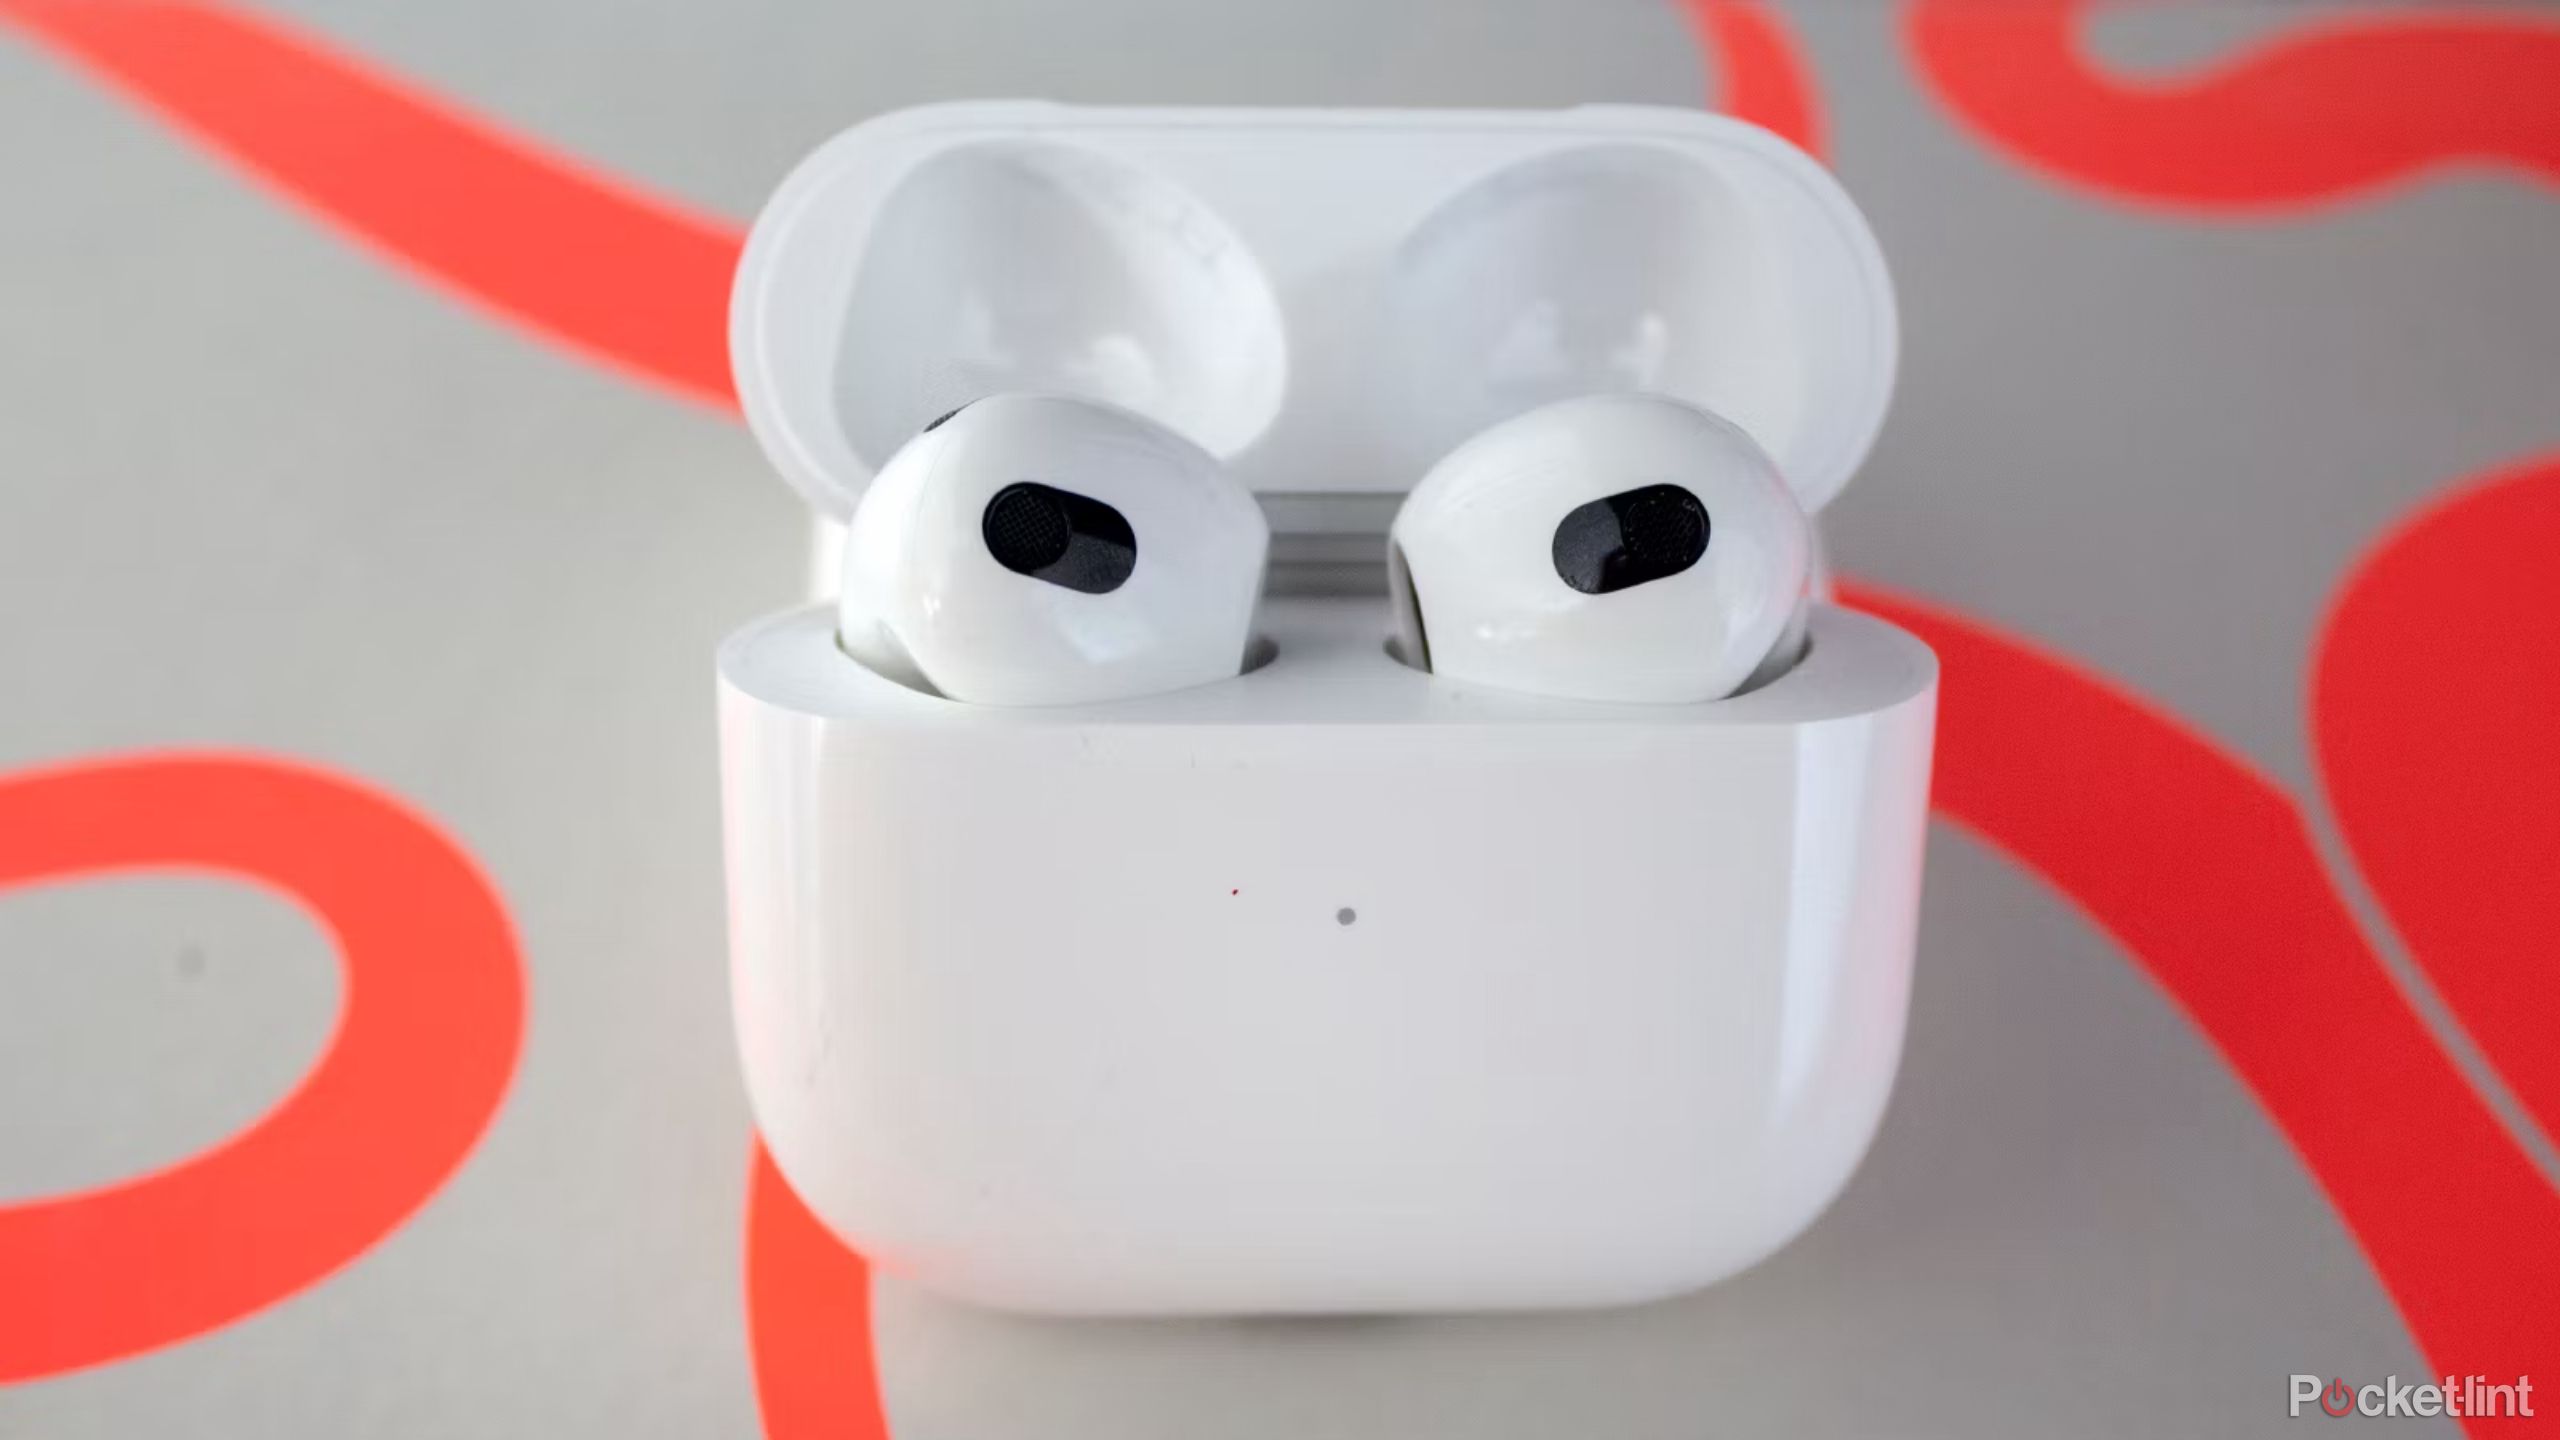 The third-generation AirPods sitting in an open charging case on a colorful background.